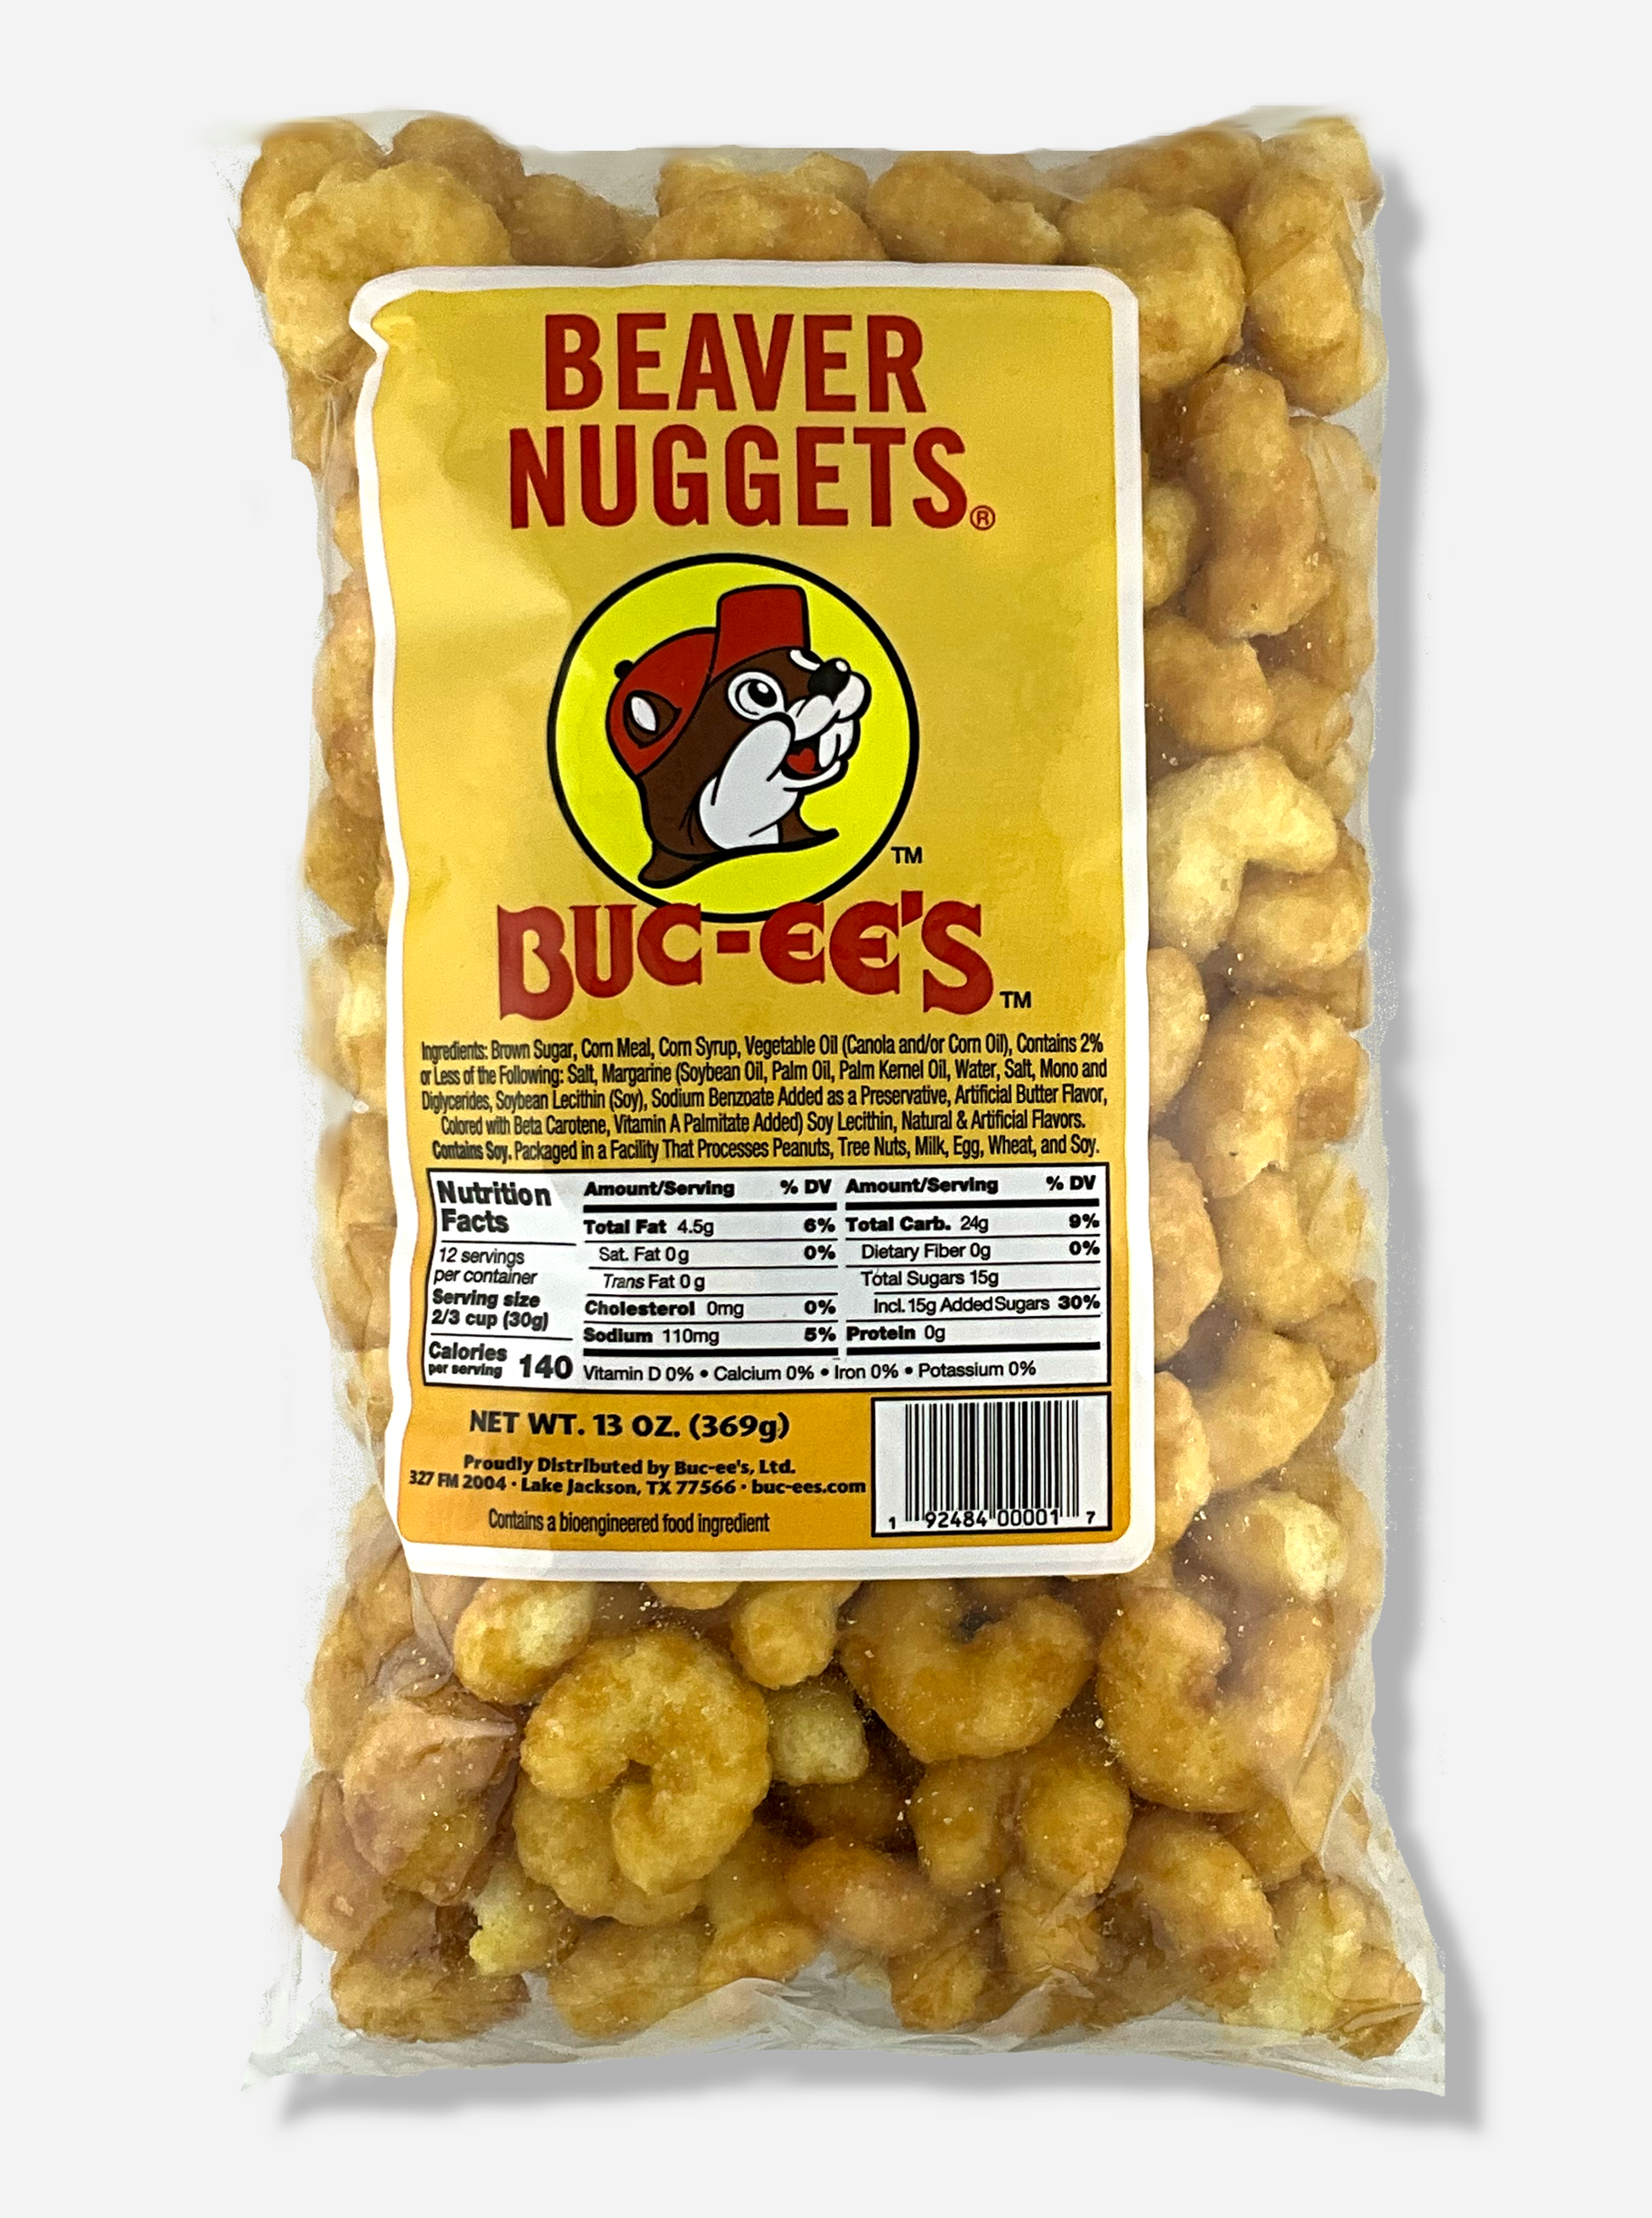 A picture of the front of a clear plastic bag of Buc-ee's Beaver Nuggets, which are puffed corn snack with caramel flavors, and has a picture of Buc-ee the Beaver on it.